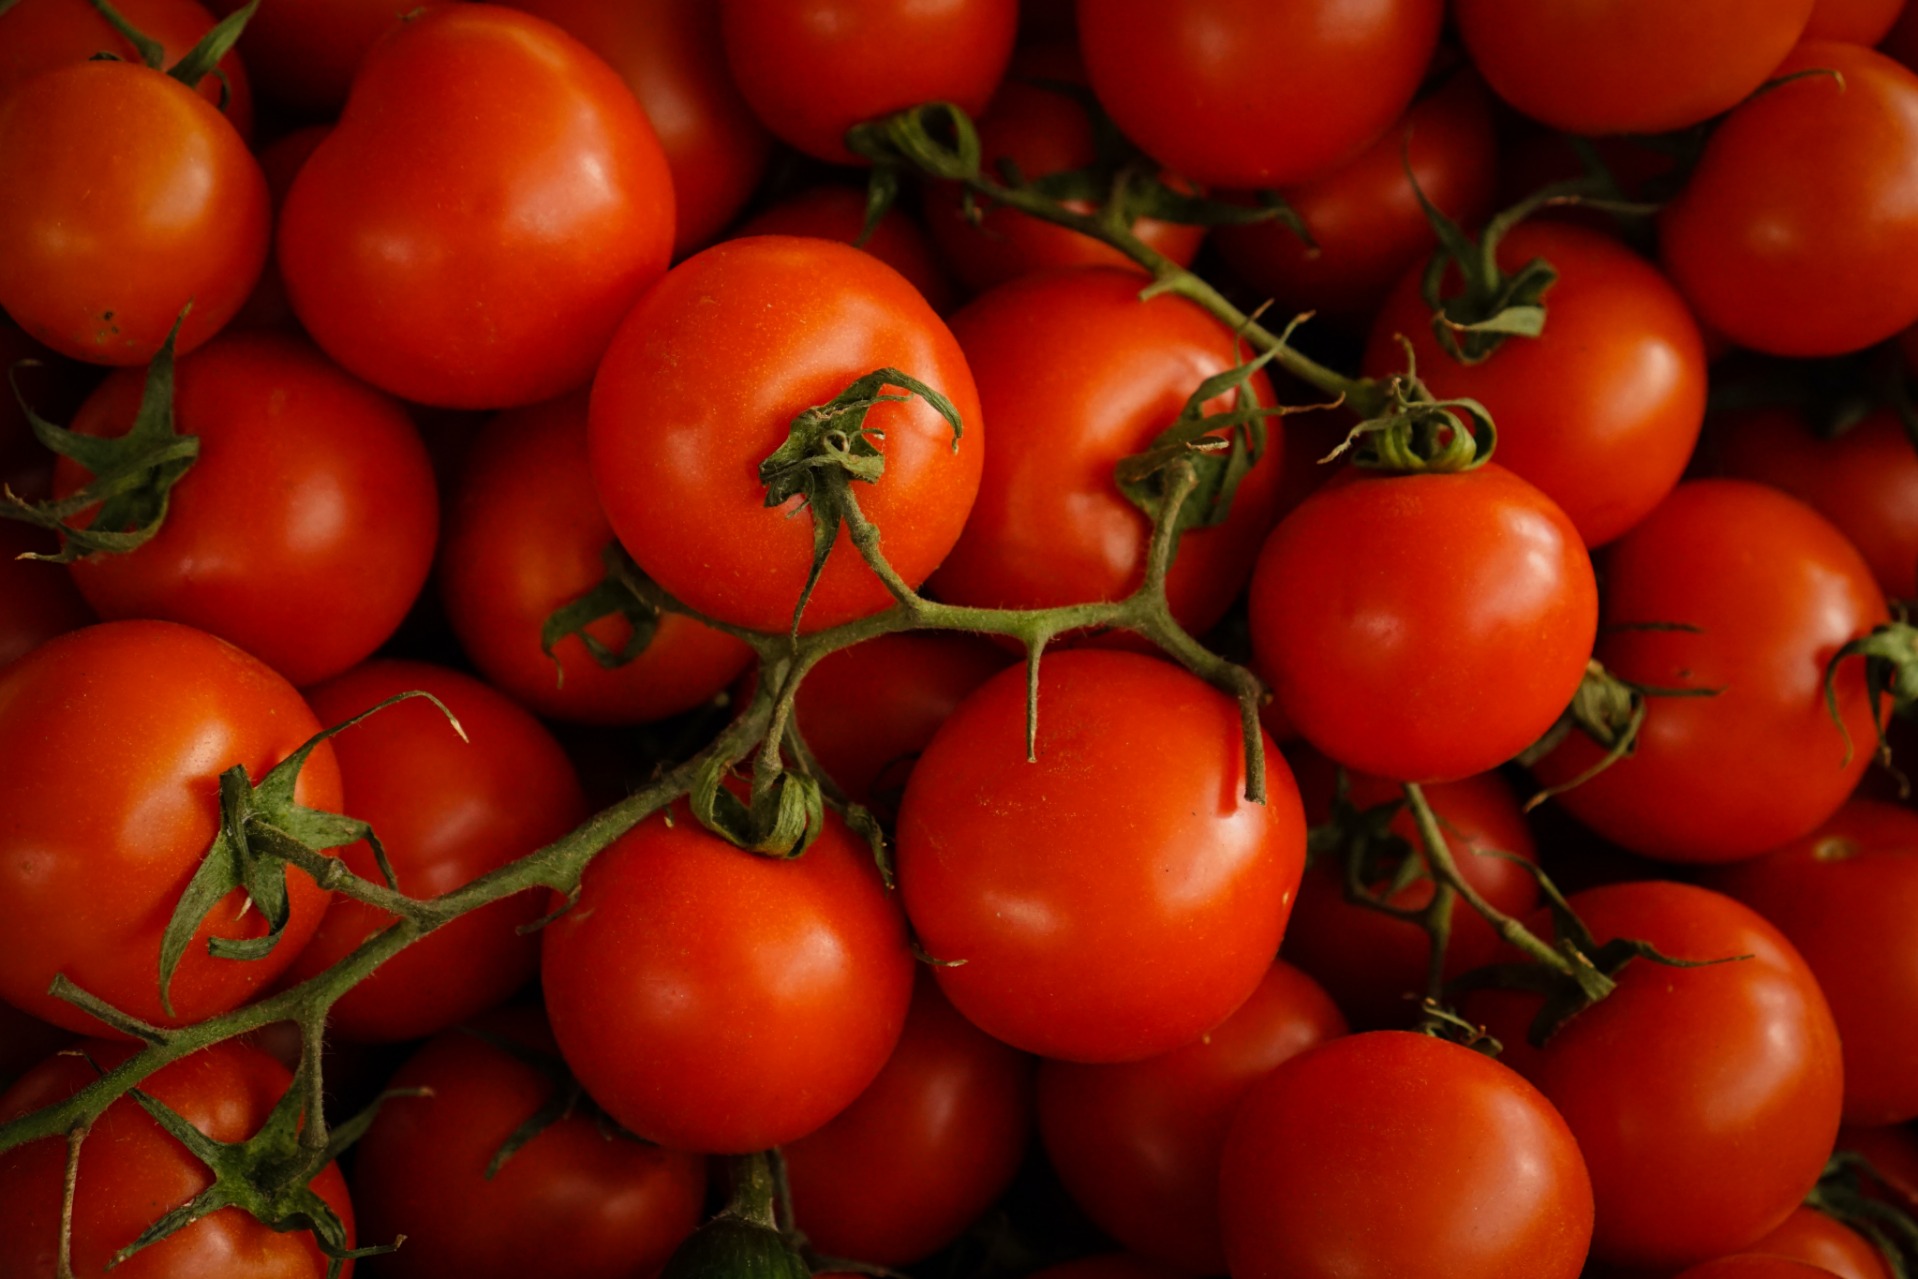 A bunch of tomatoes which contain lectins that can be removed by removing the skin and seeds